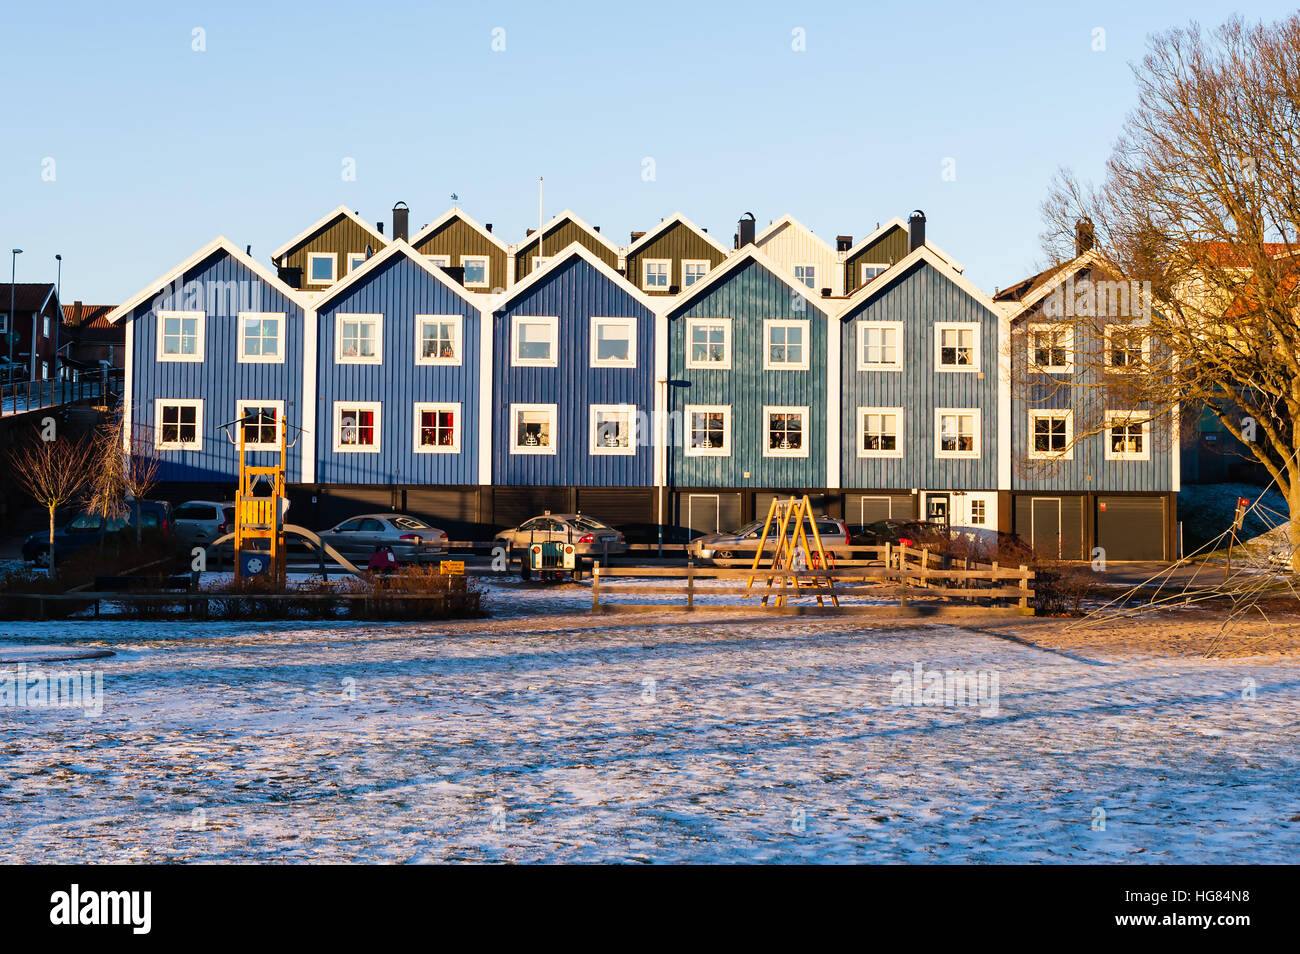 Karlskrona, Sweden - January 5, 2017: Documentary of Swedish urban lifestyle. Homes side by side in shades of blue. Playground outside and some snow o Stock Photo